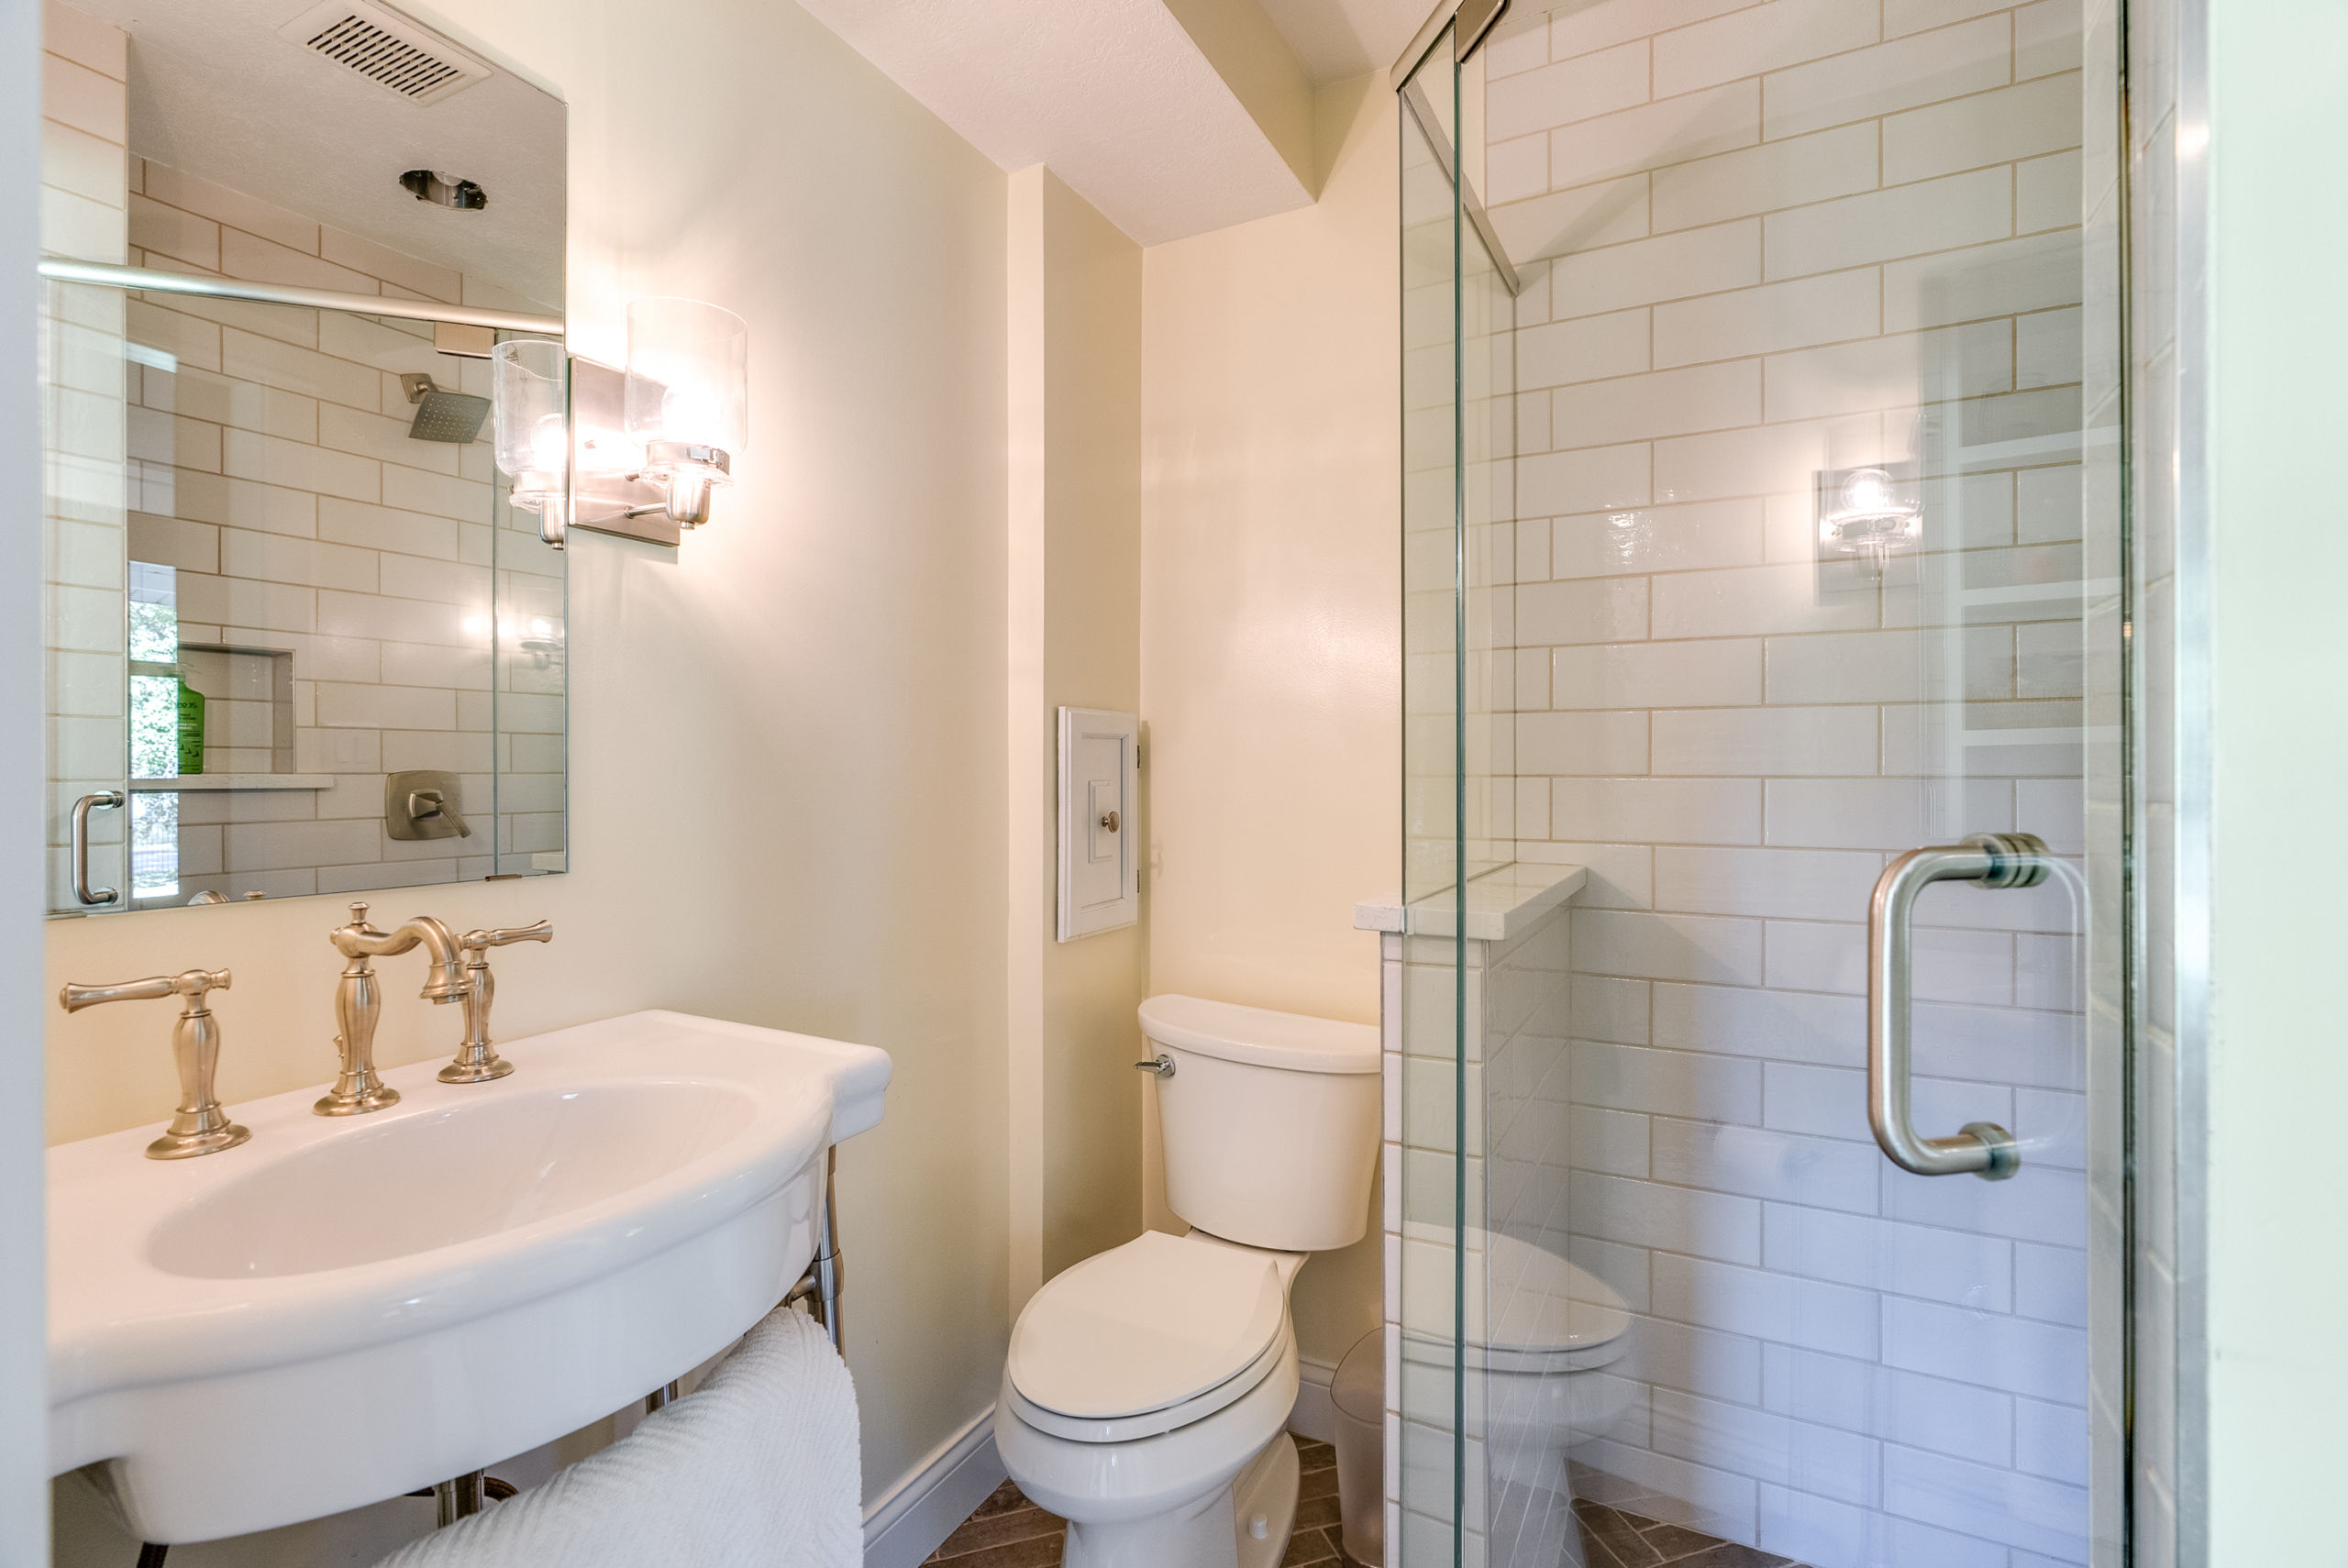 Complete Bathroom Remodel with intricate tiling, a walk-in shower and molding